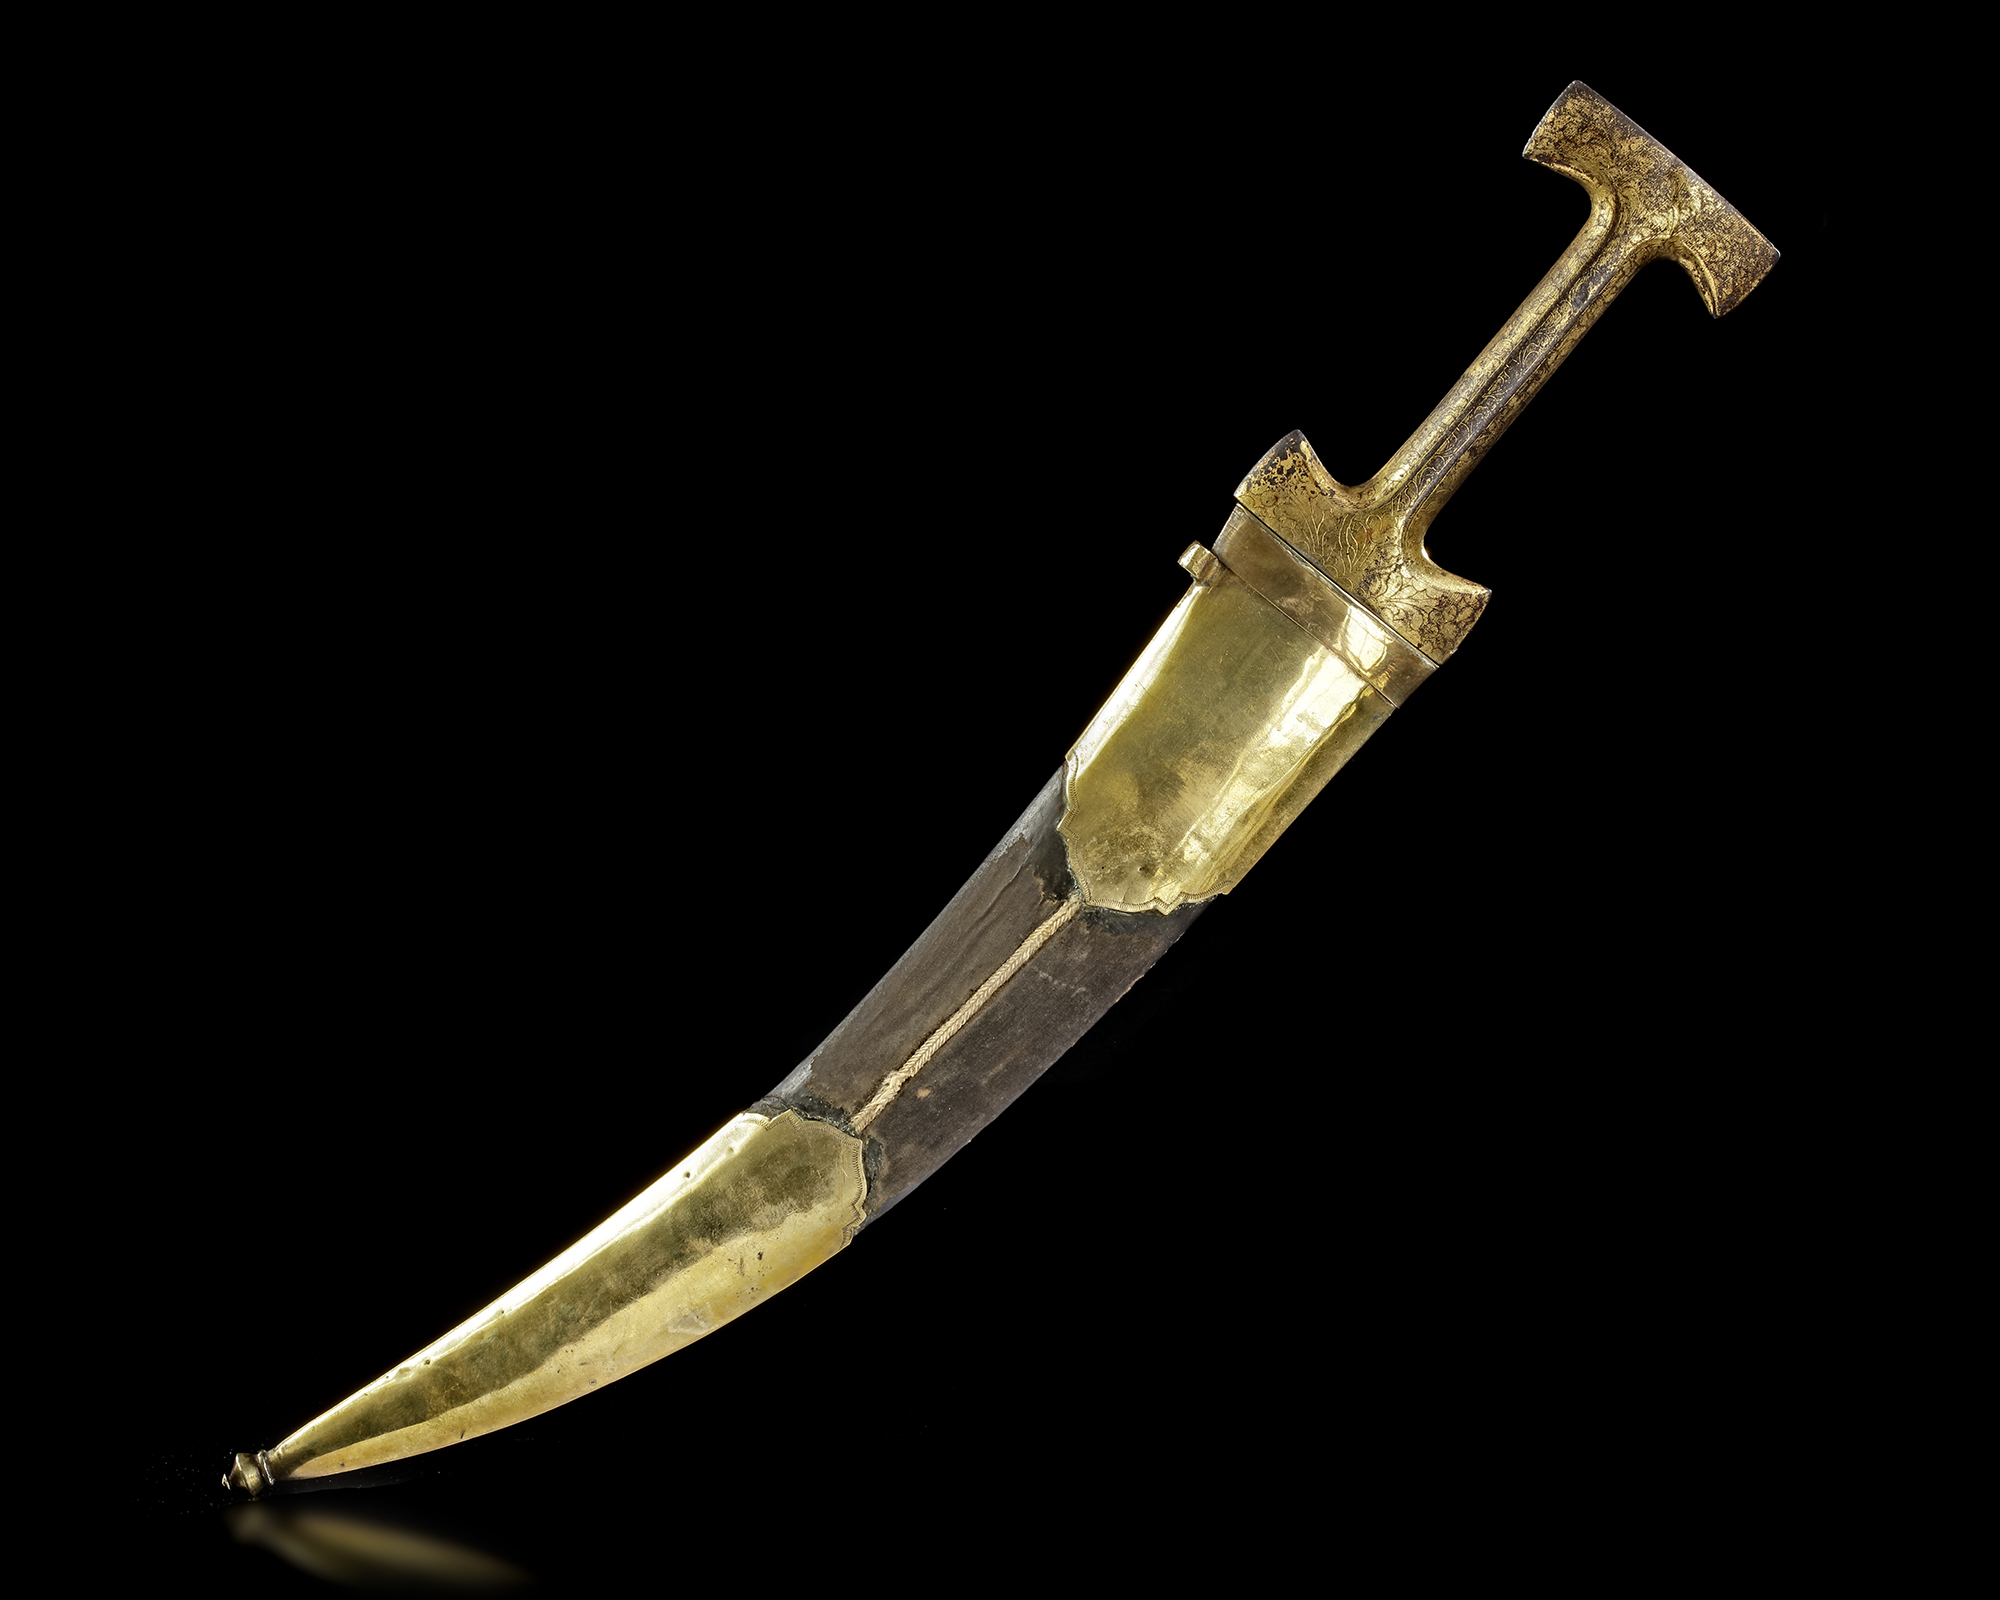 AN OTTOMAN DAGGER WITH TOMBAK HILT AND SCABBARD, TURKEY, 19TH CENTURY - Image 2 of 5